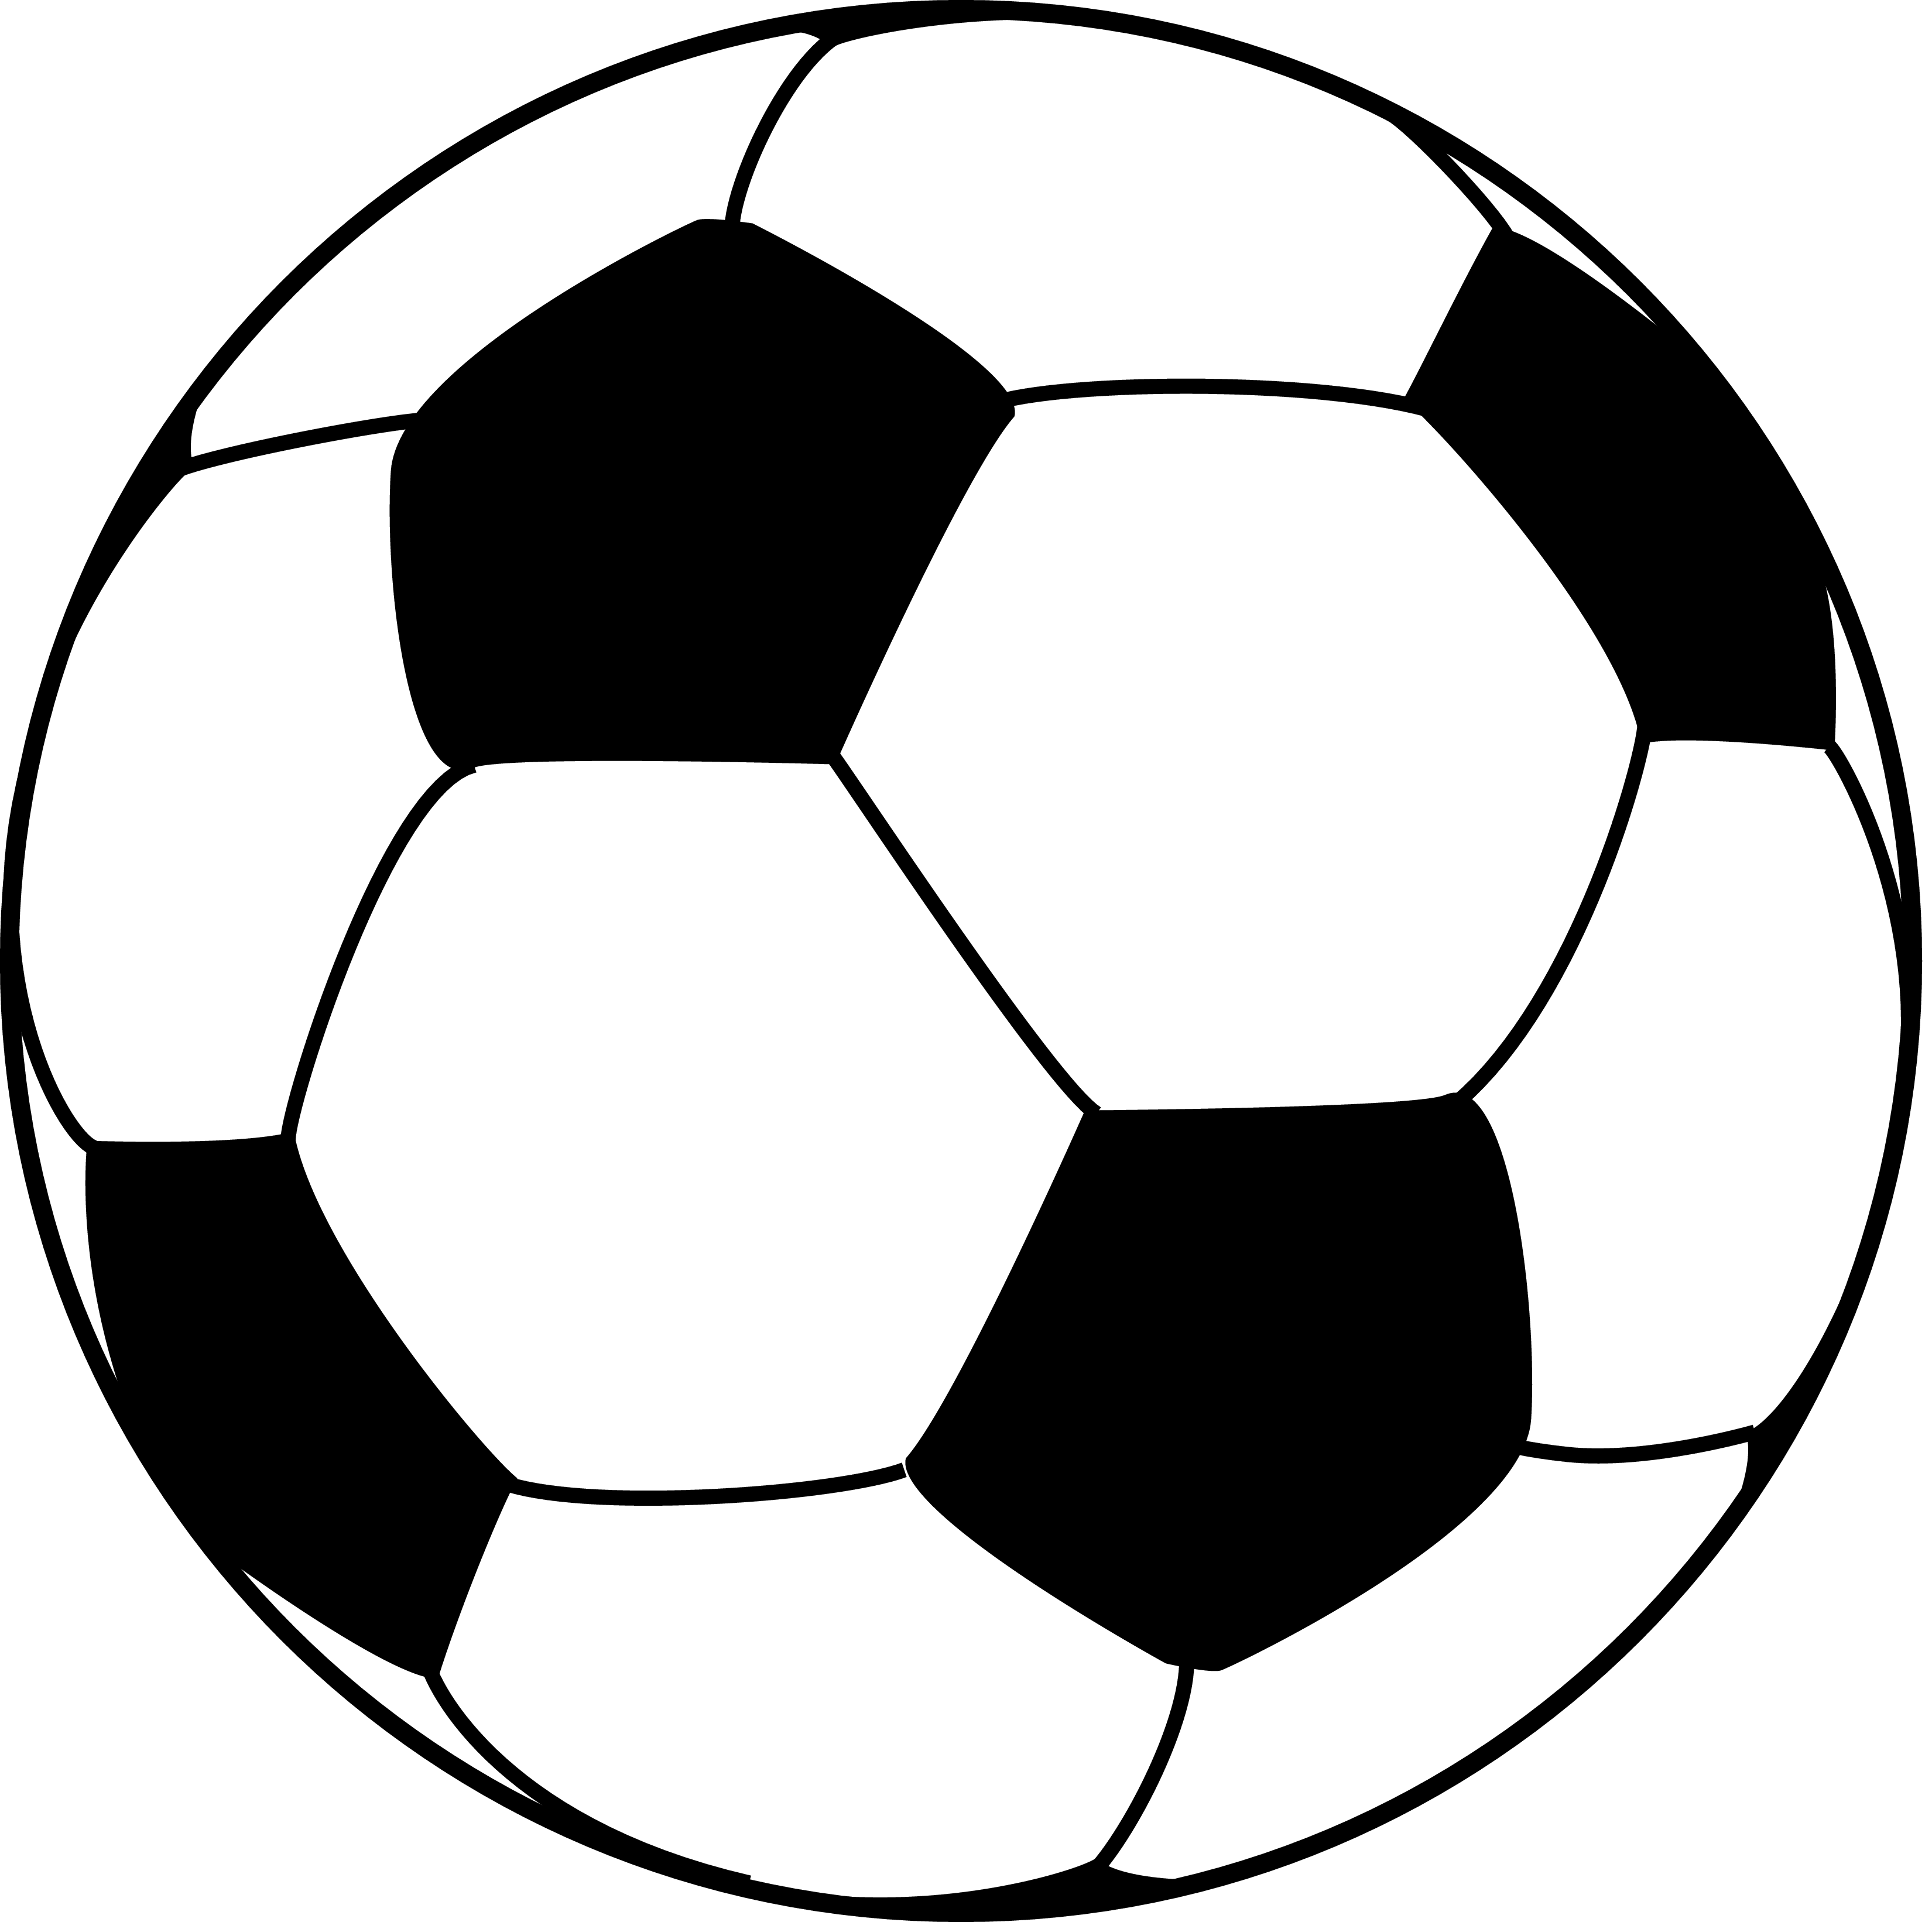 Youtube clipart football. Soccer ball drawing easy